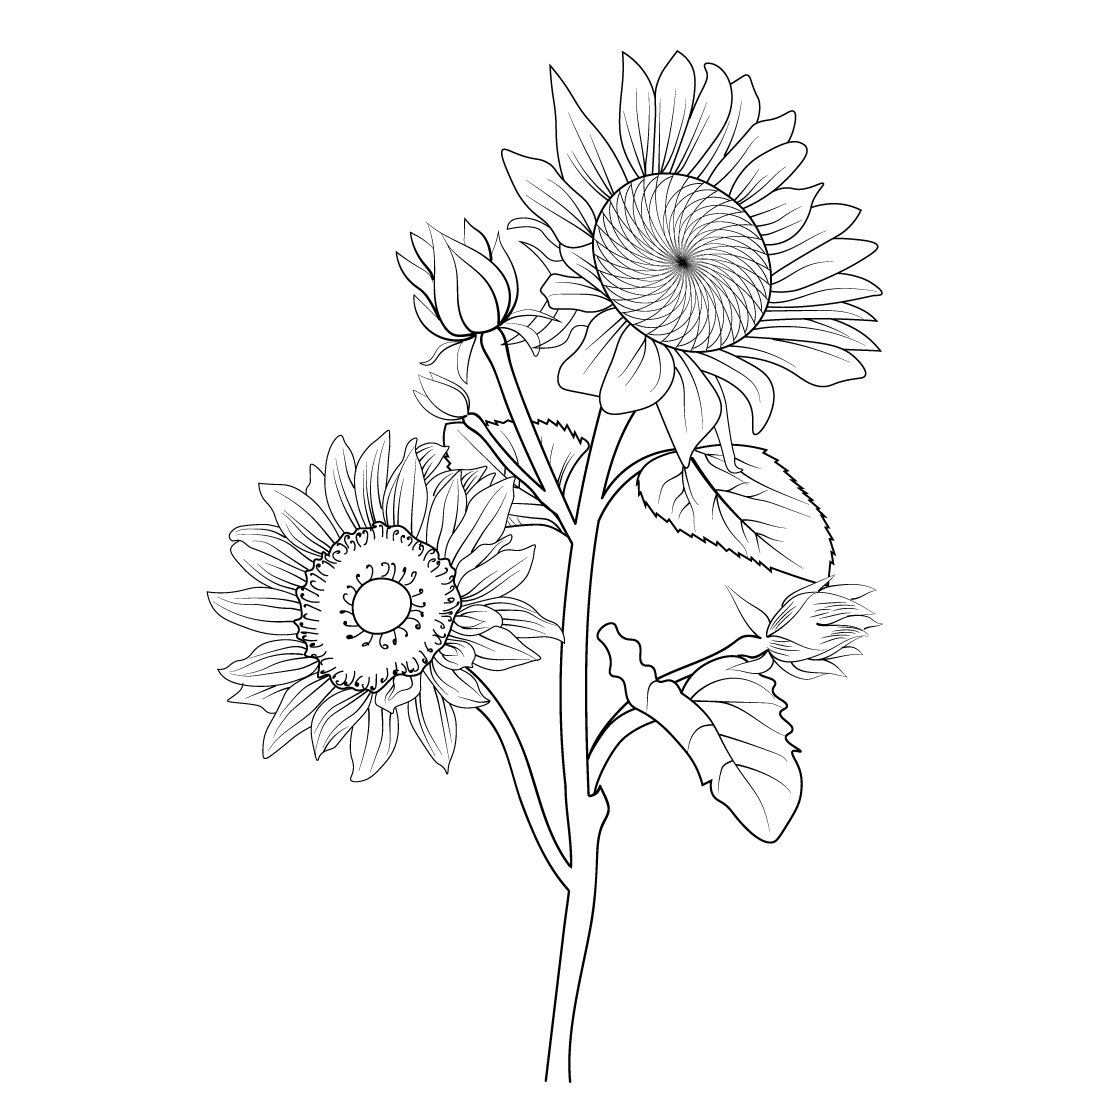 Botanical vintage sunflower line art, sunflower vector illustration, a branch of sunflower, hand drawing sunflower, vintage sunflower illustration black and white, sunflower coloring page for adults and children, sunflower drawing for coloring books preview image.